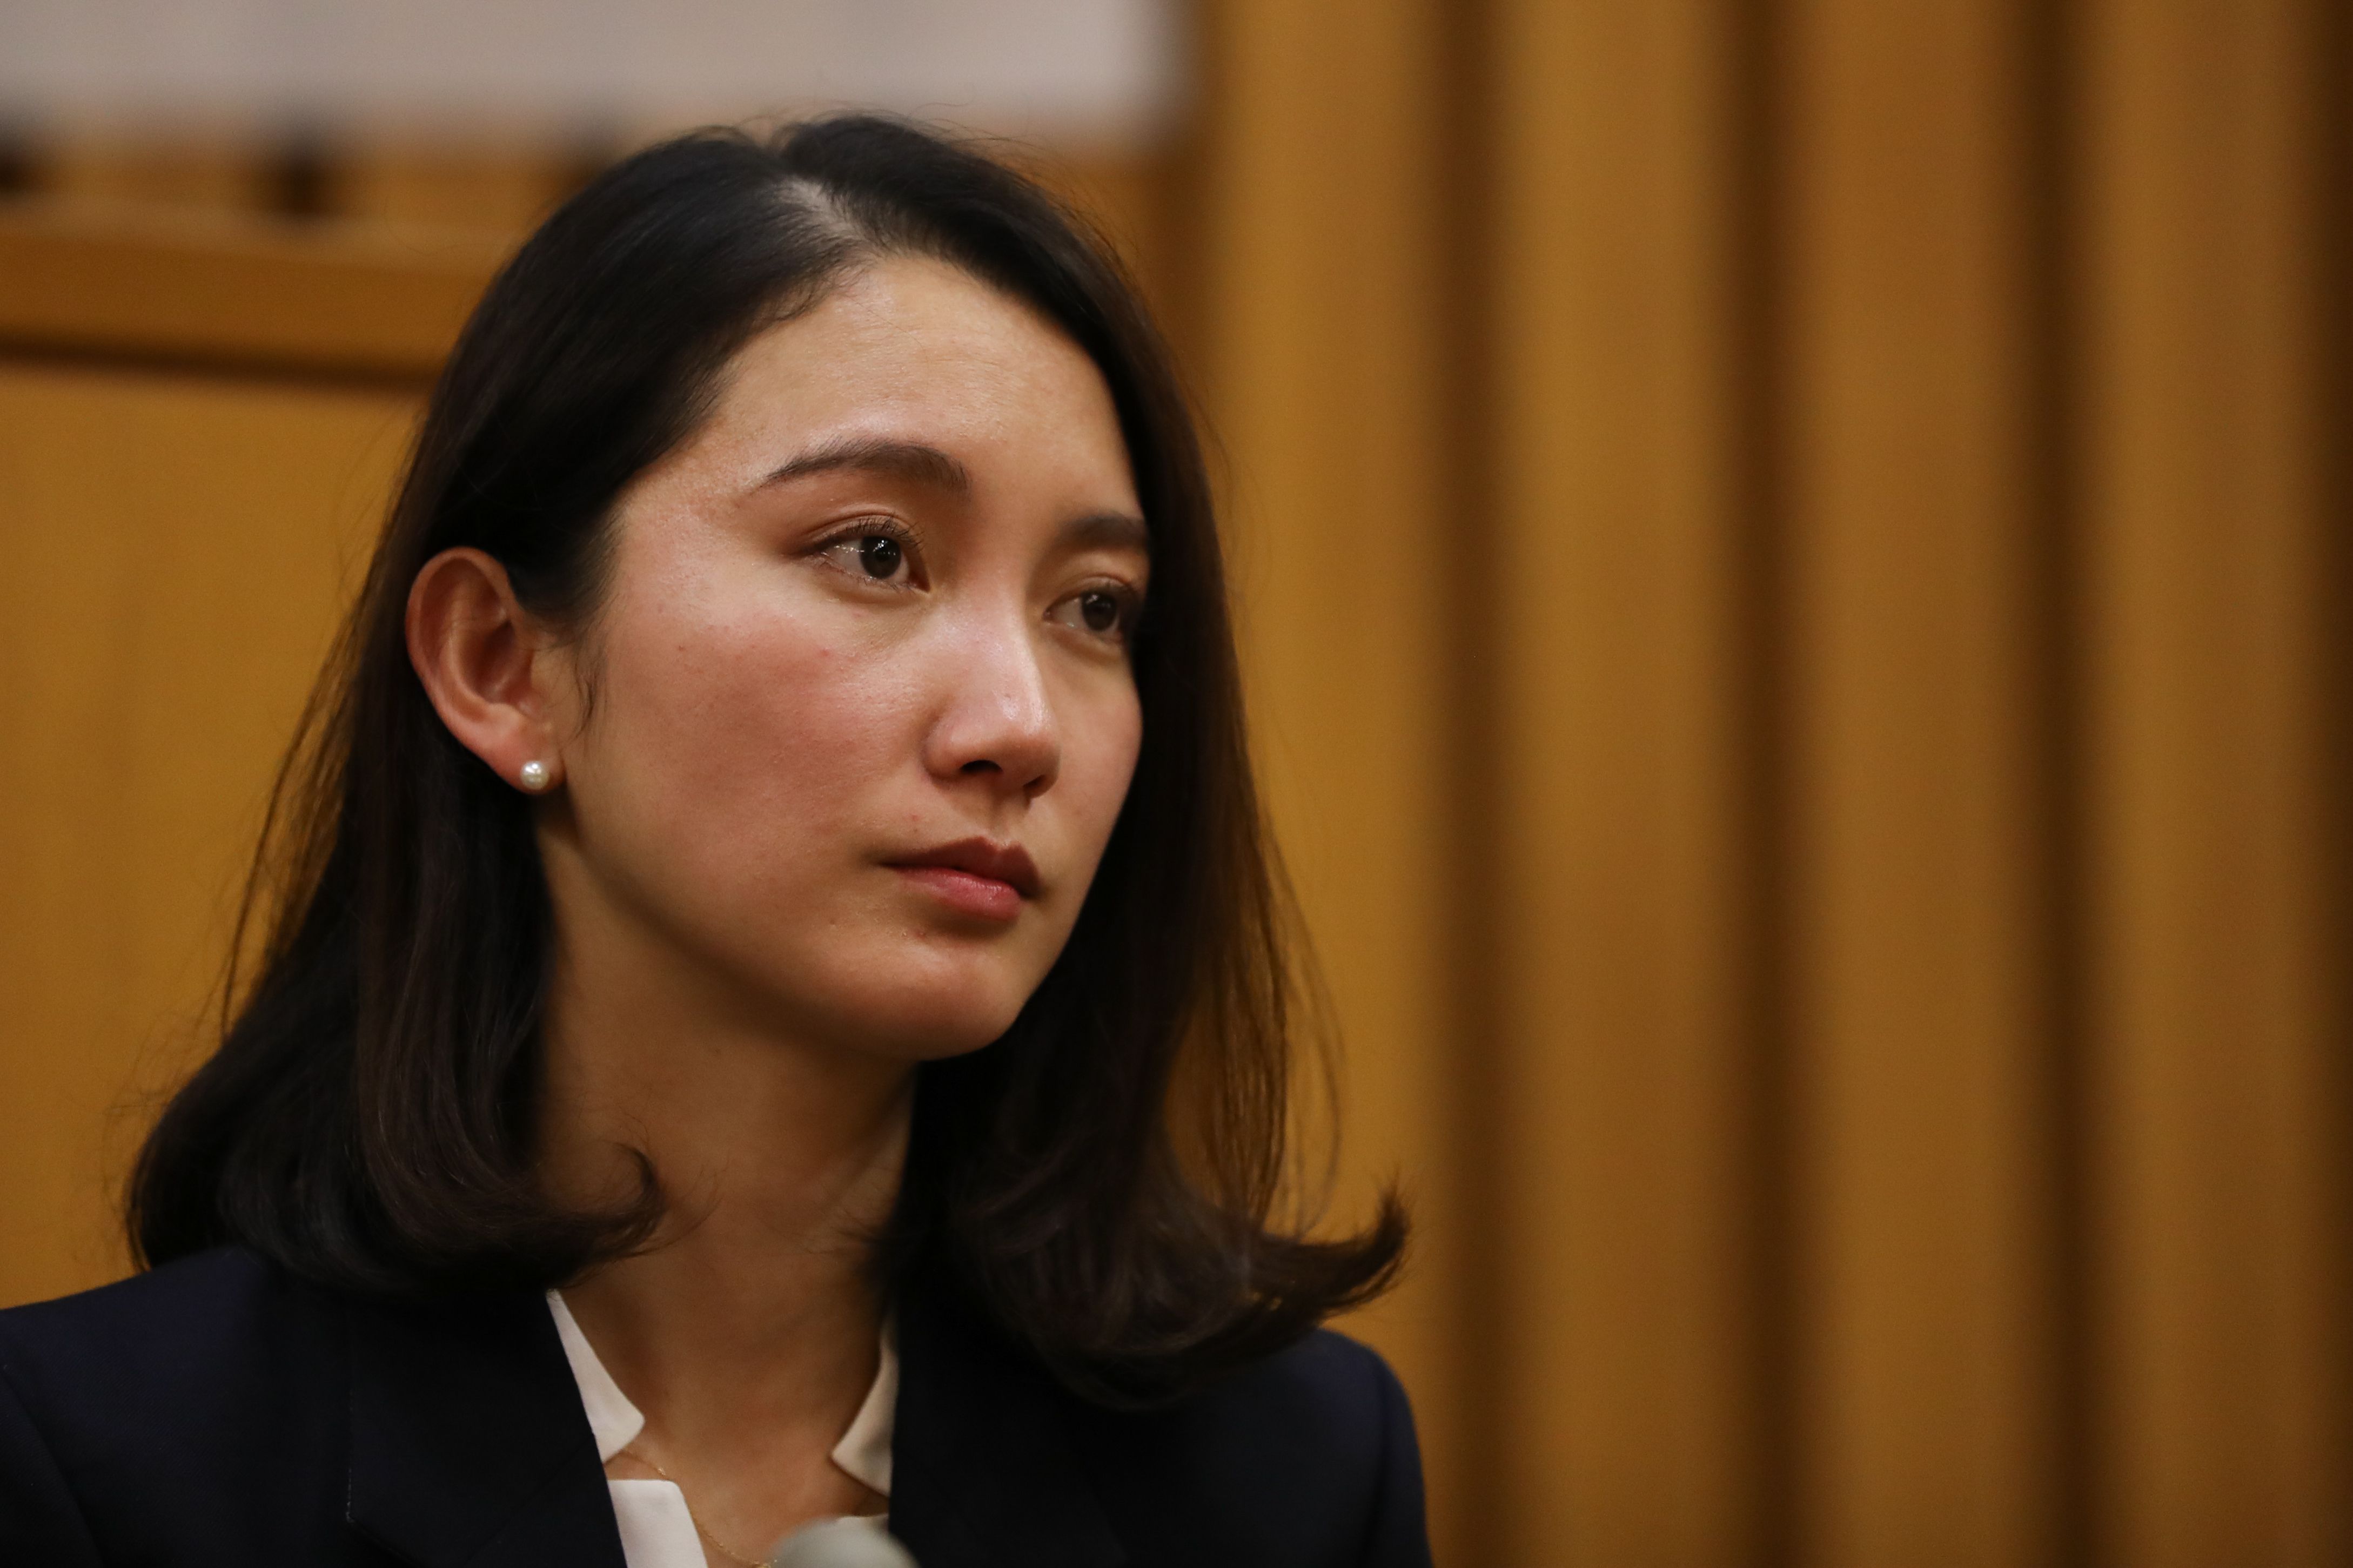 4355px x 2903px - Shiori Ito won civil case against her alleged rapist. But Japan's rape laws  need overhaul, campaigners say | CNN